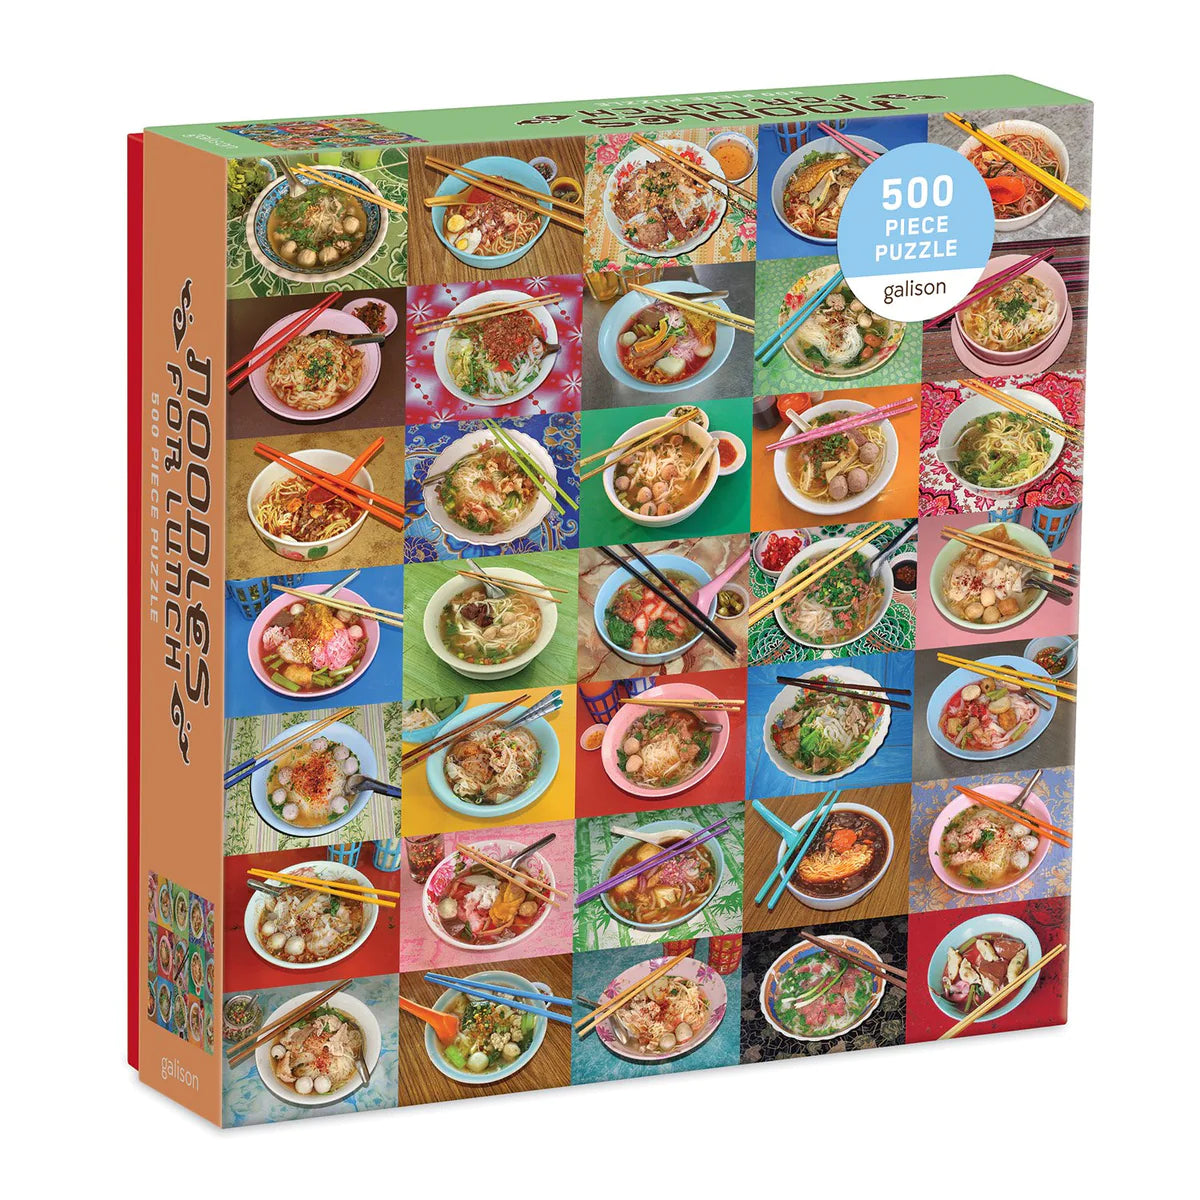 Noodles for Lunch Jigsaw Puzzle 500pcs by penny blackk